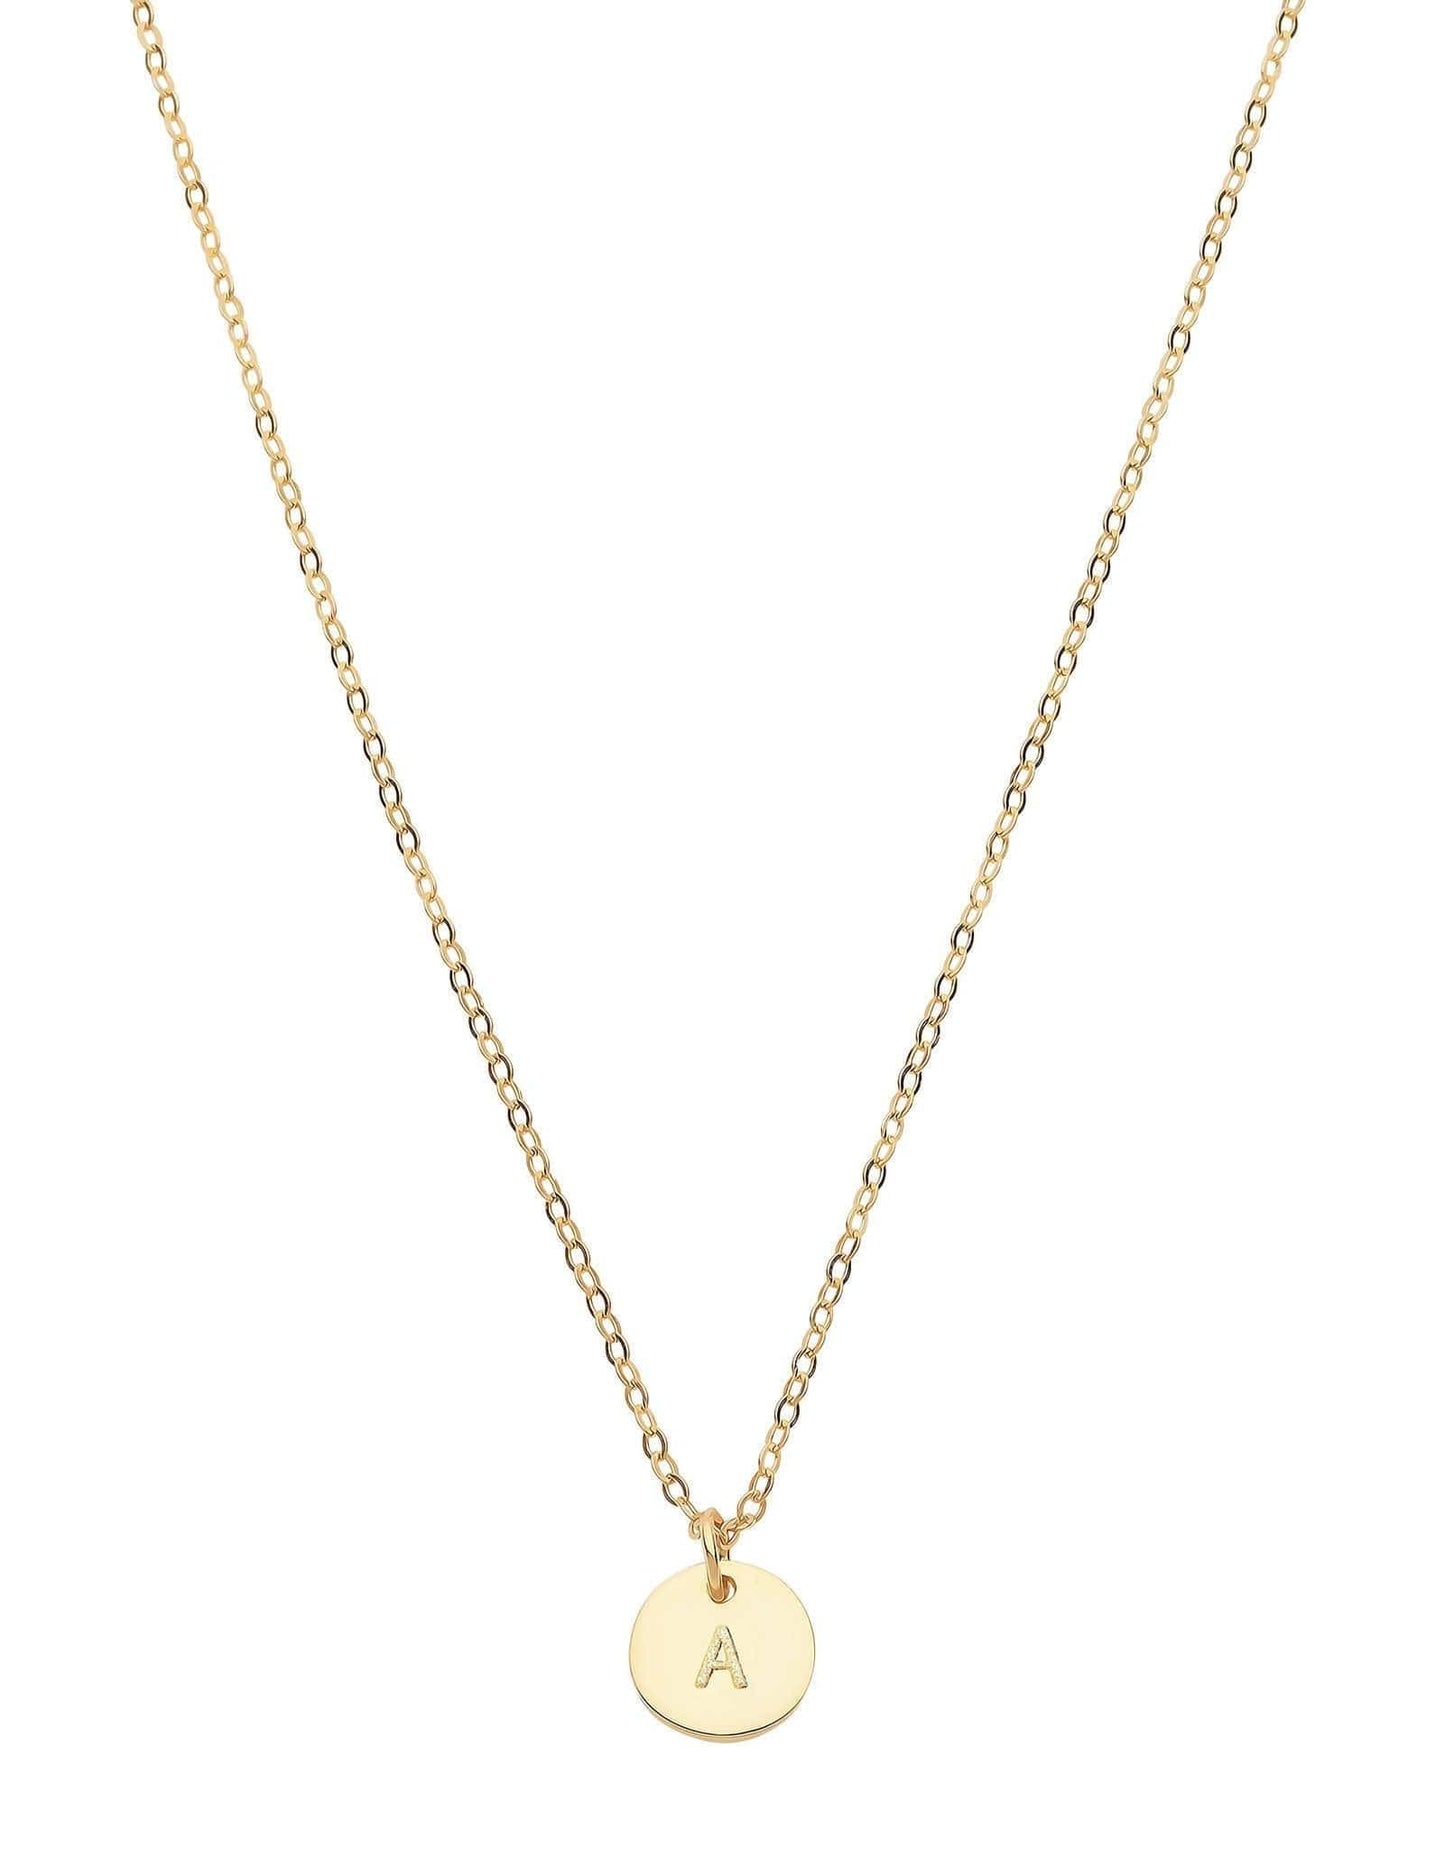 Dear Addison Yellow Gold Letter A Necklace